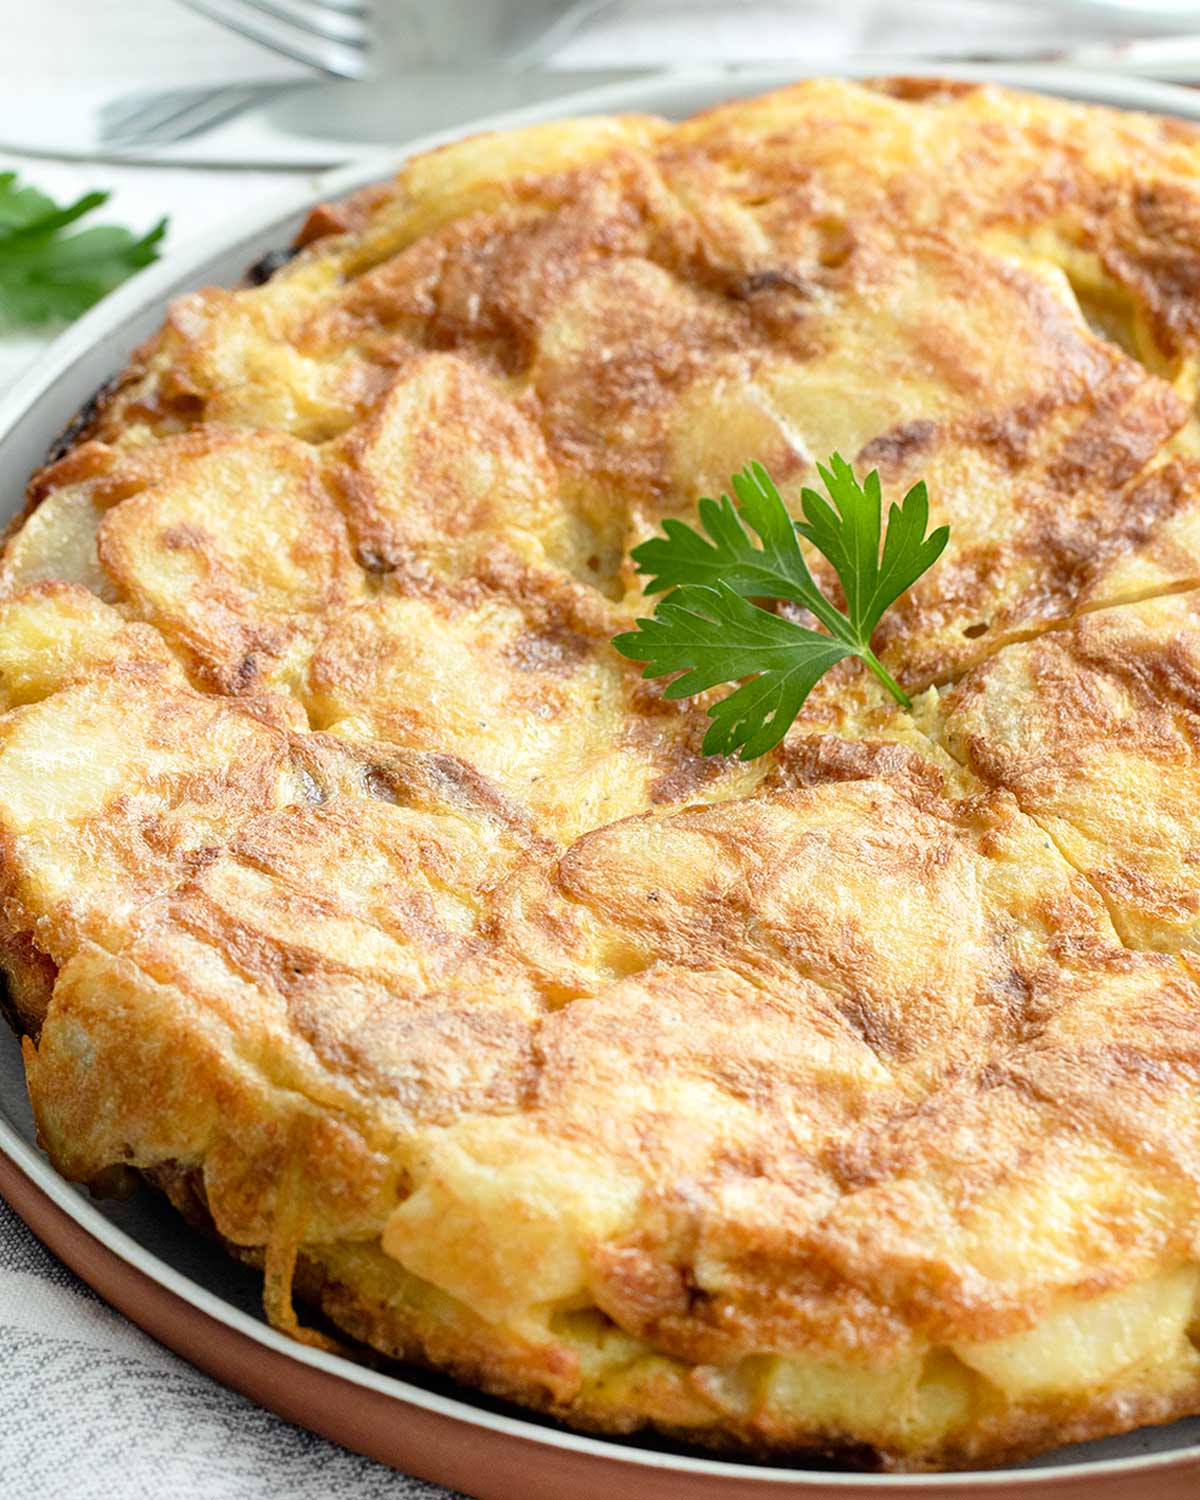 spanish tortilla on a plate with a garnish of parsley.